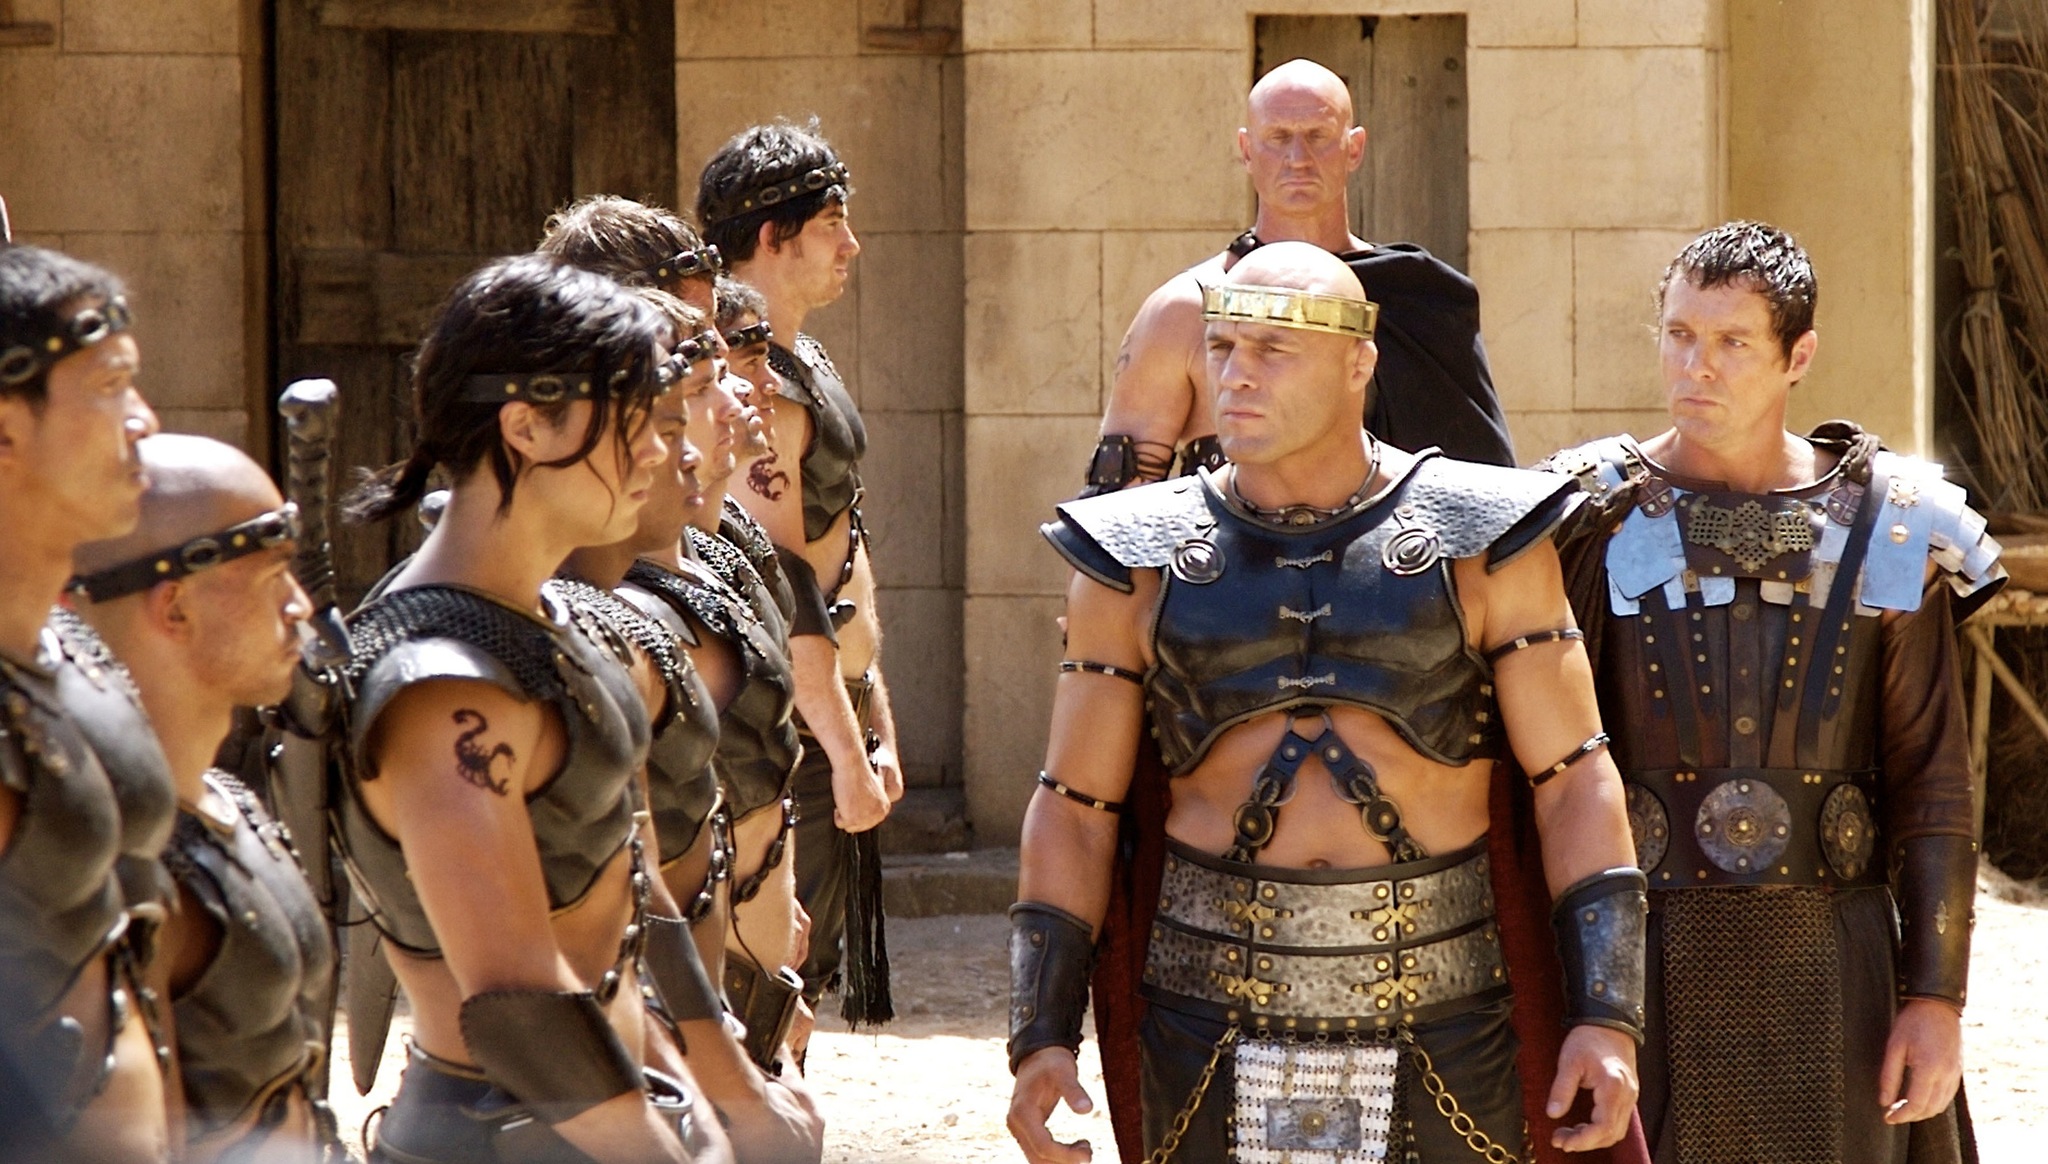 Still of Randy Couture in The Scorpion King: Rise of a Warrior (2008)